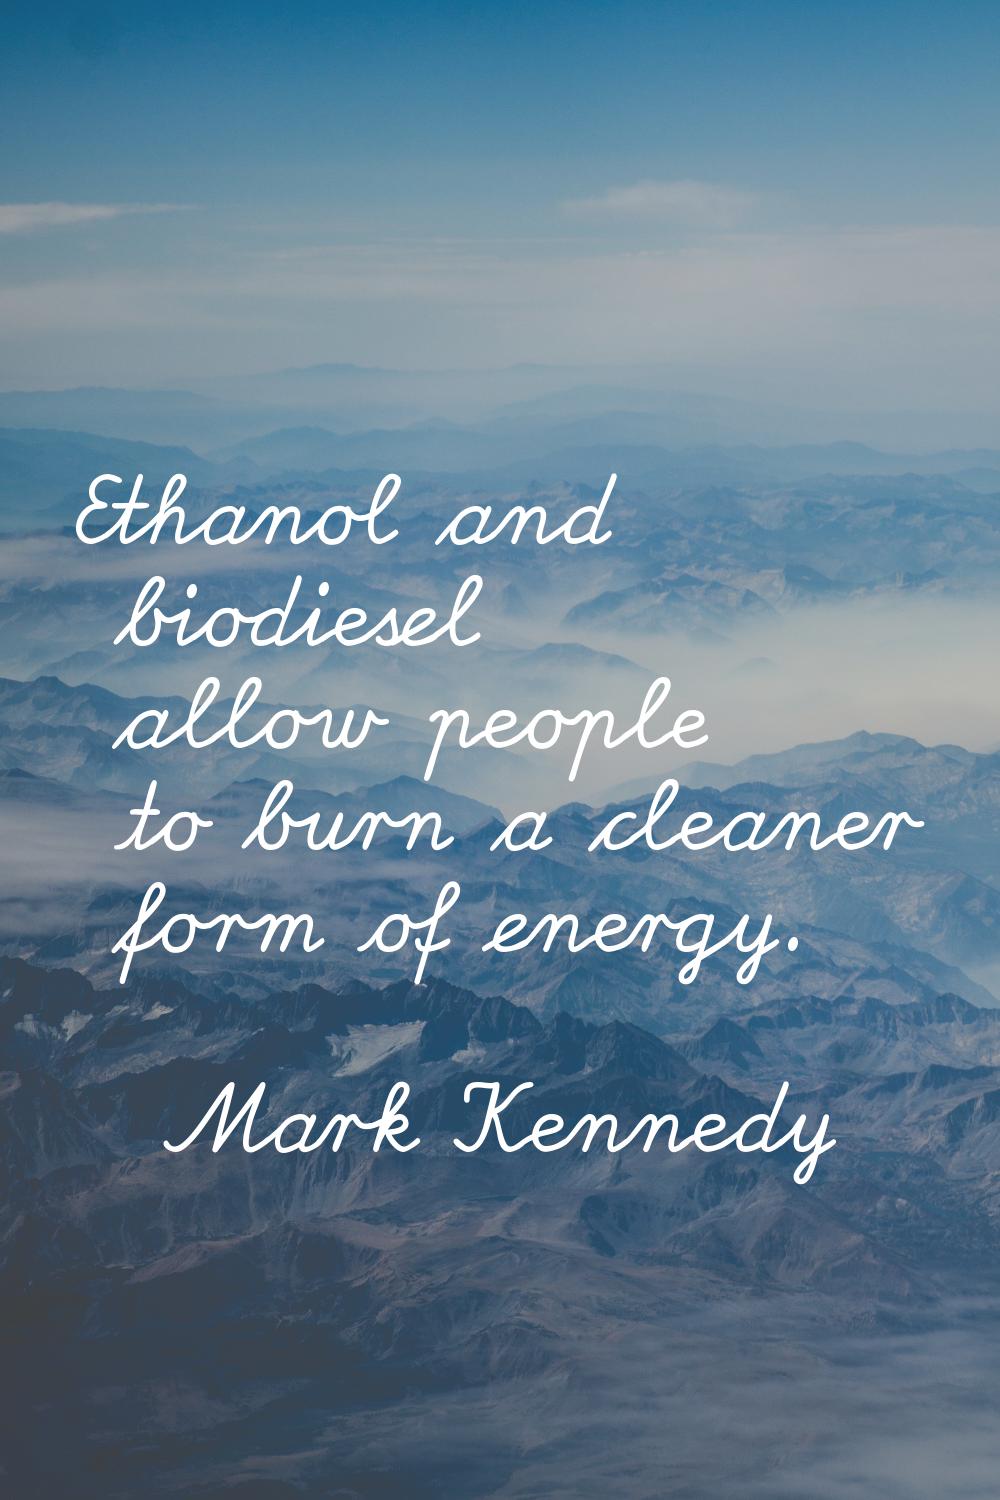 Ethanol and biodiesel allow people to burn a cleaner form of energy.